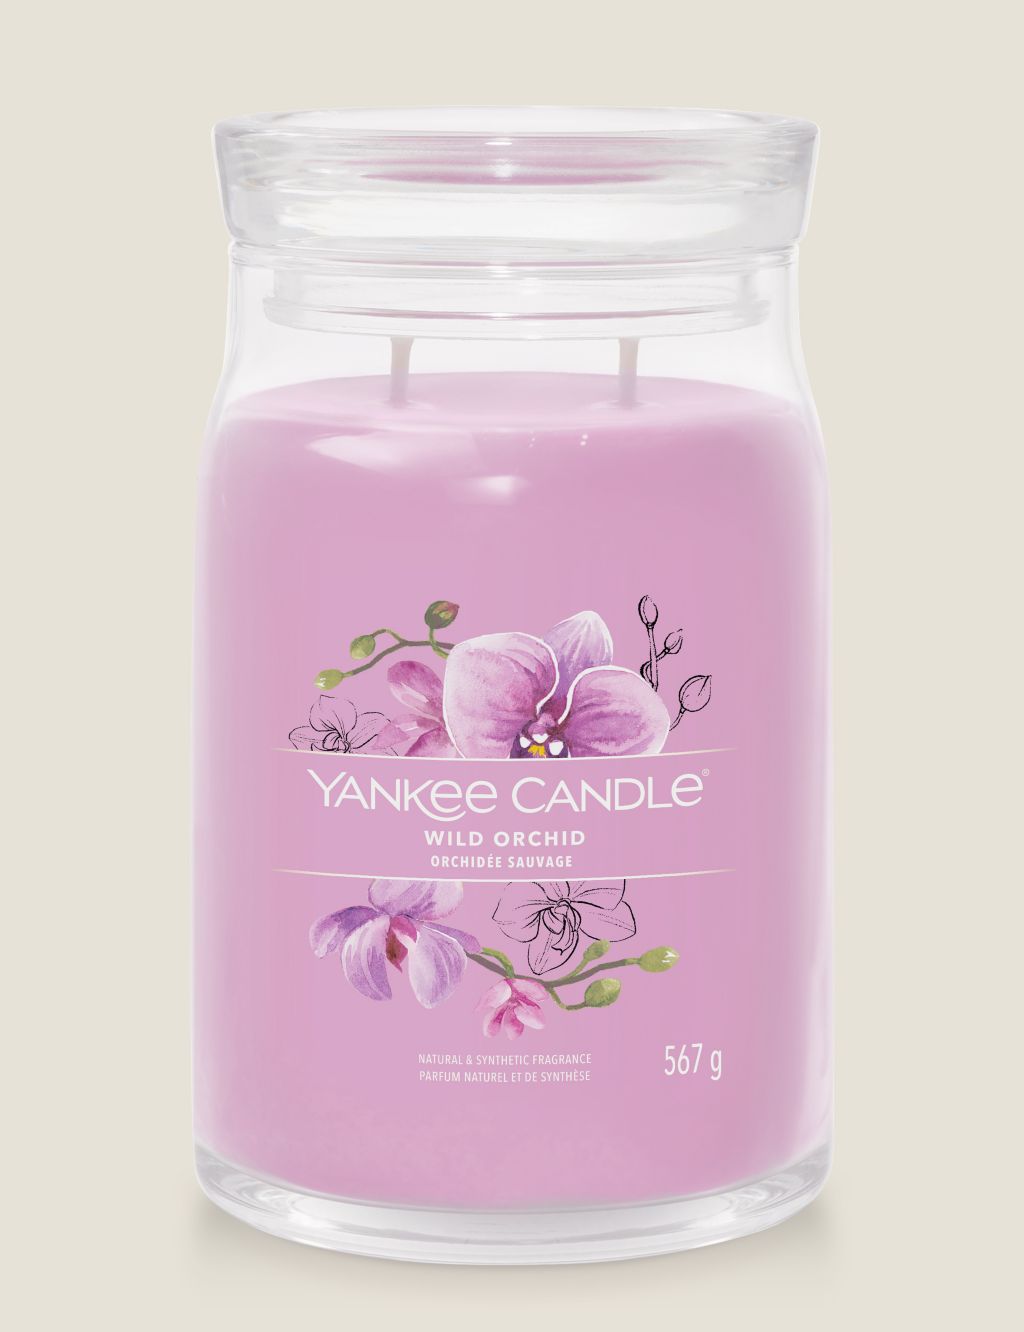 Wild Orchid Signature Large Jar Scented Candle image 1